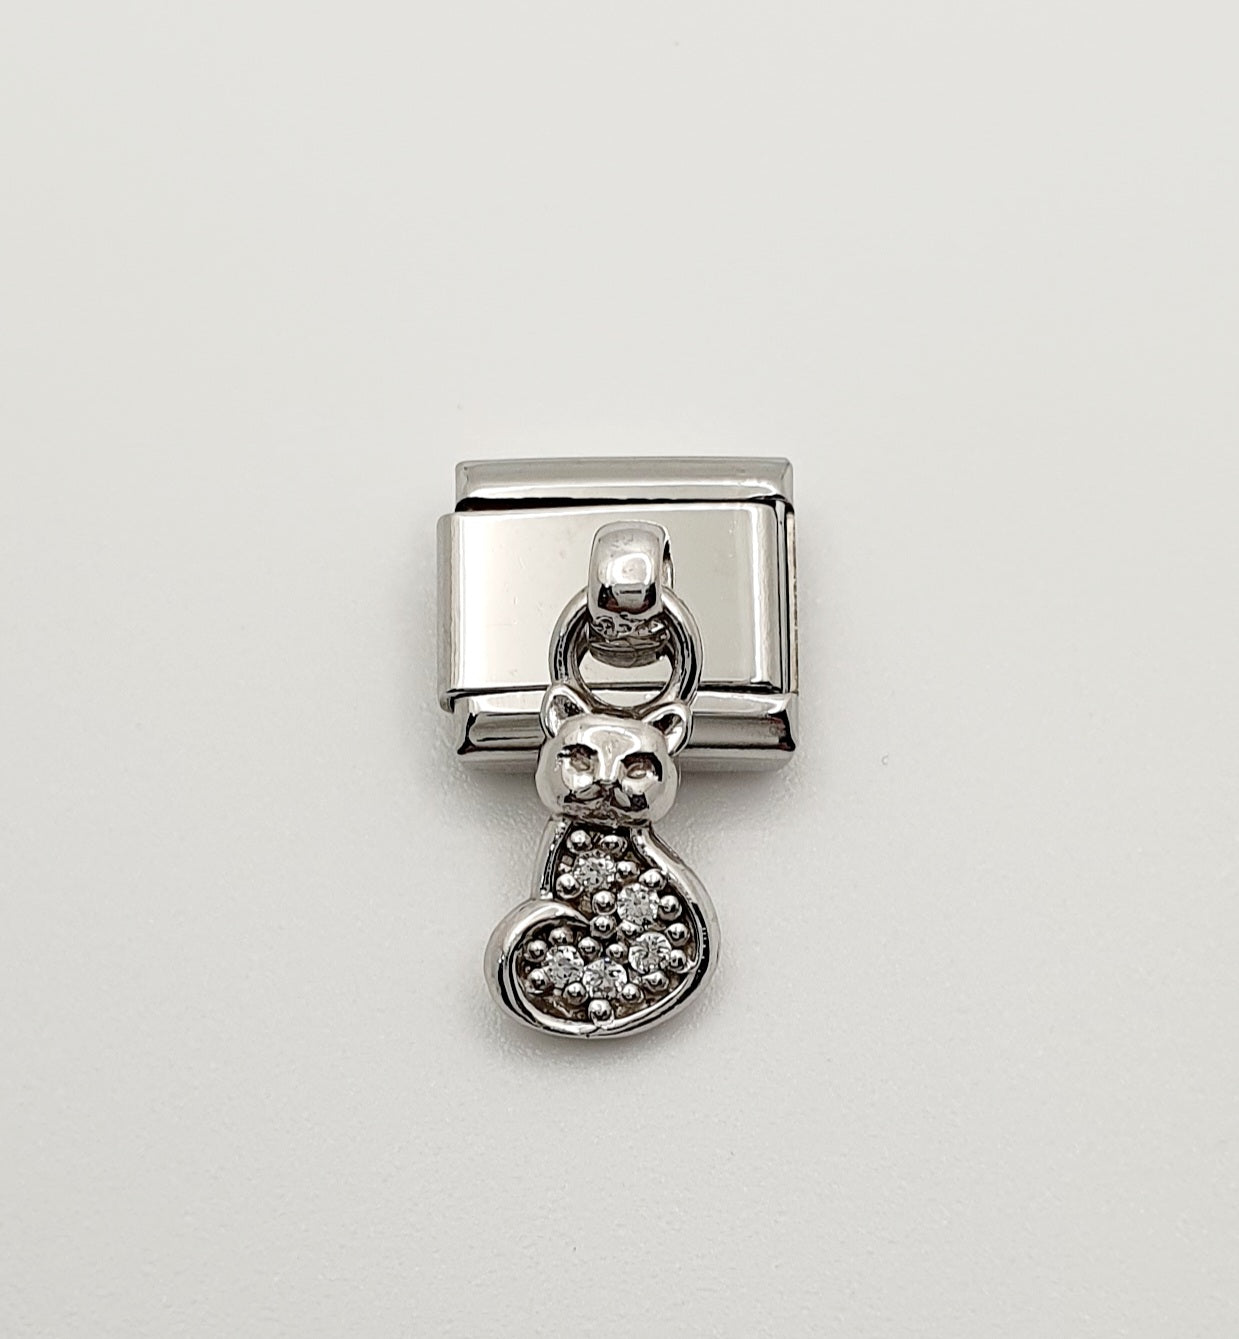 Nomination Charm Link "Cat" Stainless Steel with CZ's & 925 Silver, 331800 18